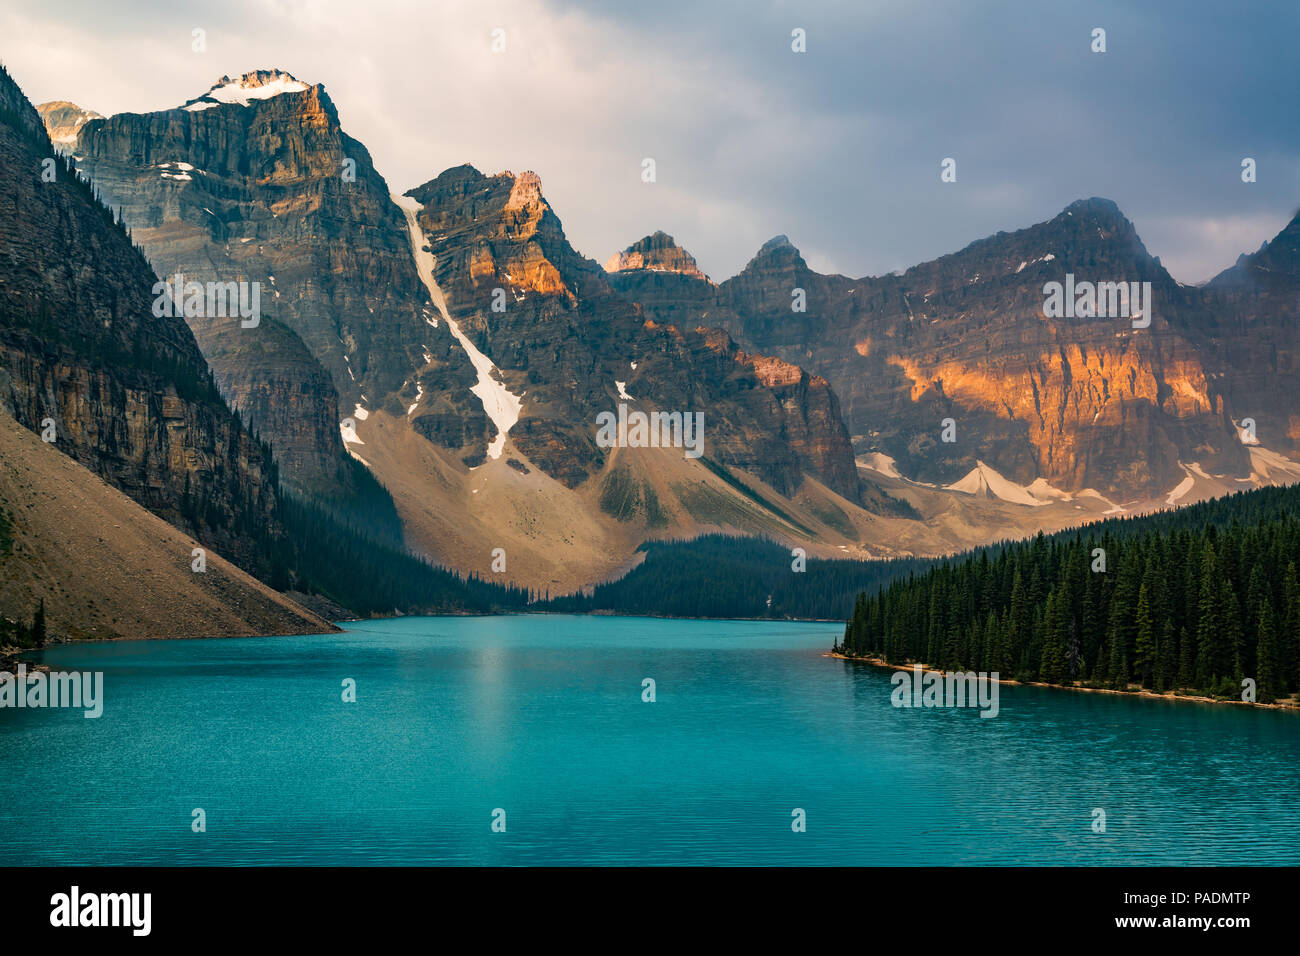 Sunrise with turquoise waters of the Moraine lake with sin lit rocky mountains in Banff National Park of Canada in Valley of the ten peaks. Stock Photo